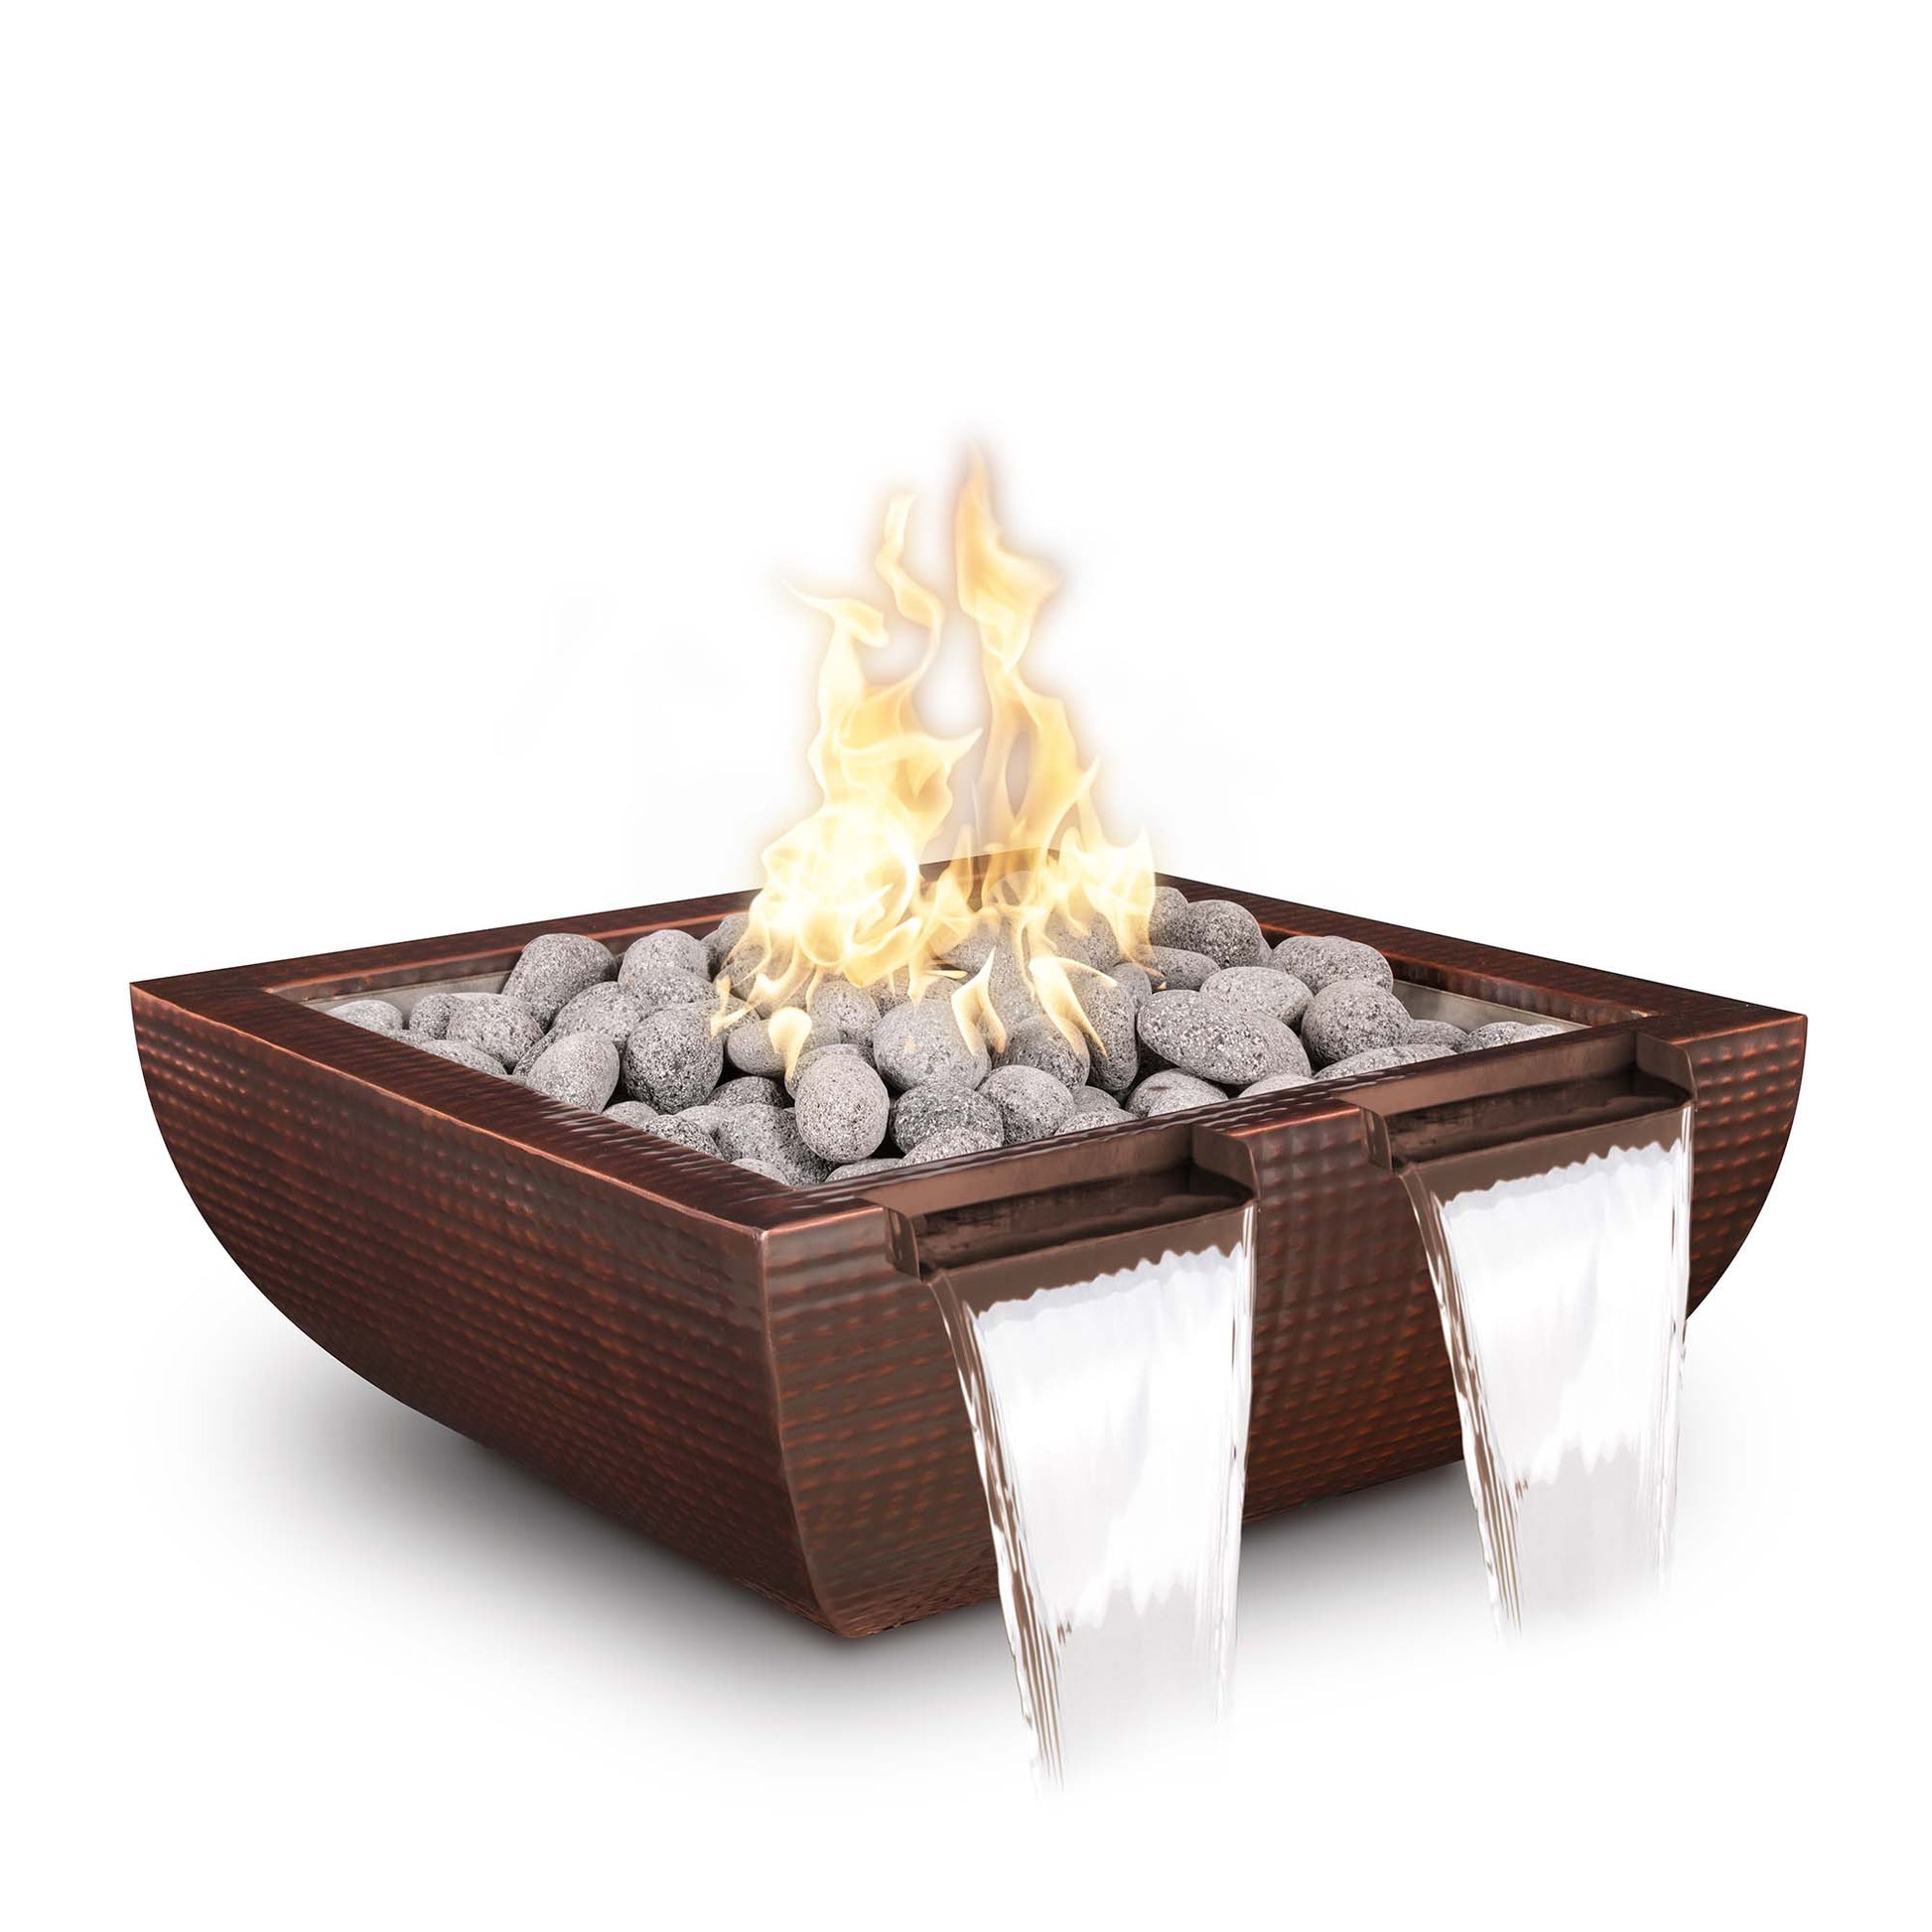 The Outdoor Plus Avalon Twin Spill 36" Gray Powder Coated Metal Liquid Propane Fire & Water Bowl with Match Lit with Flame Sense Ignition